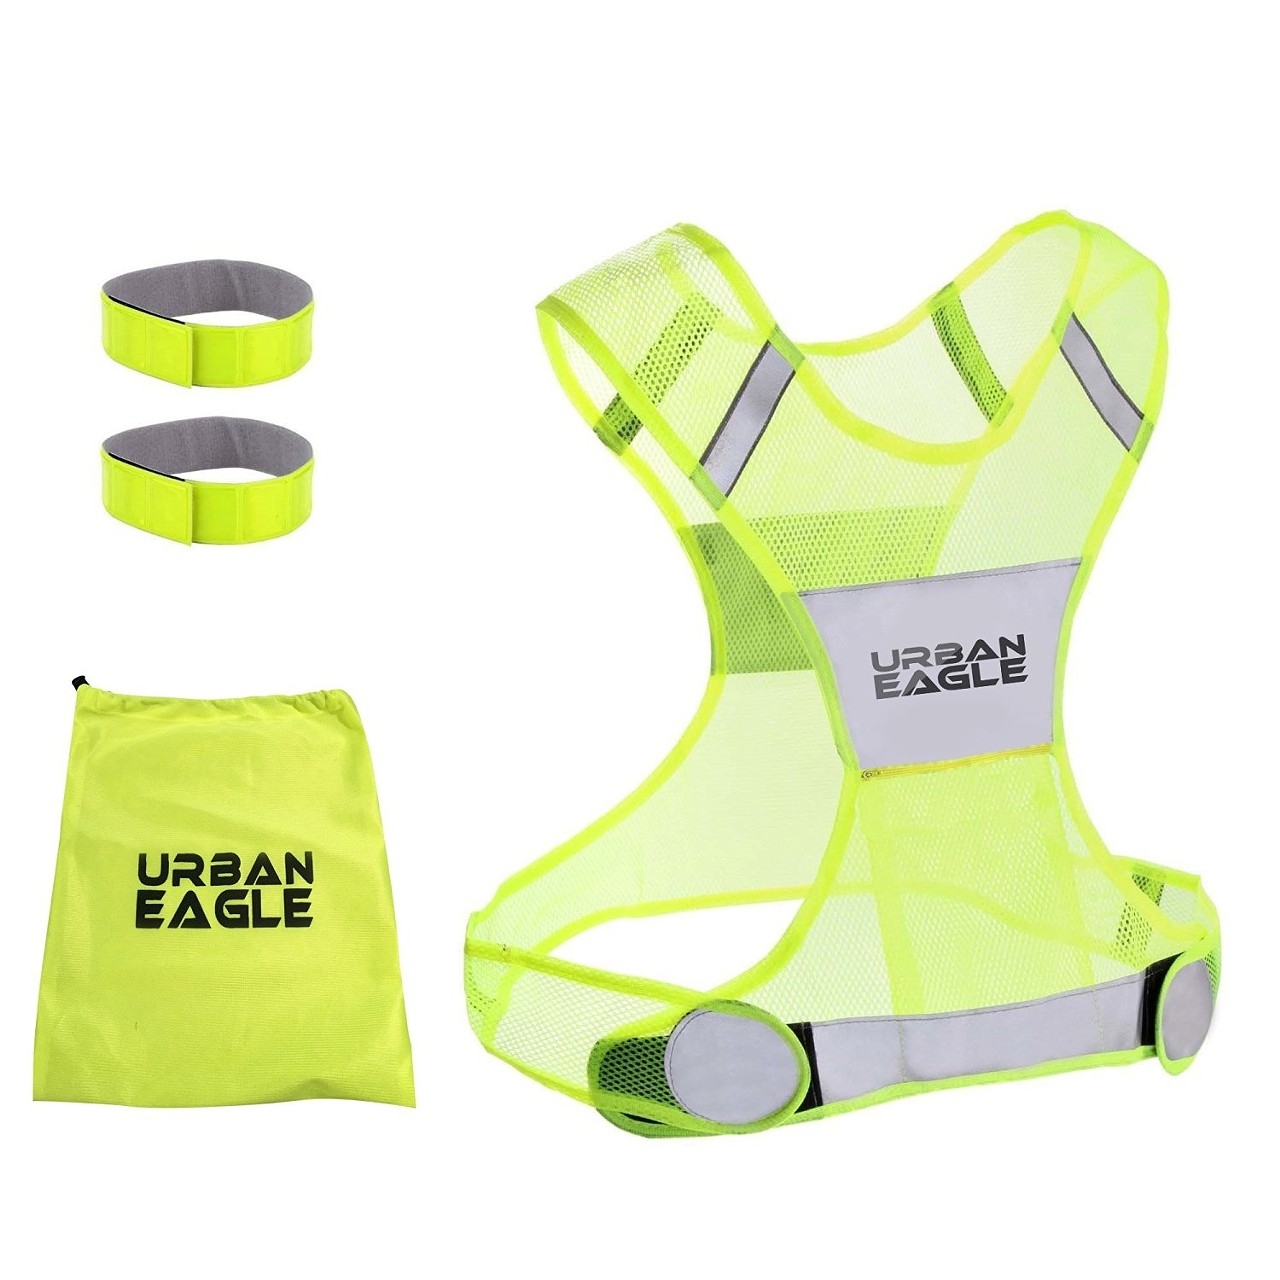  Reflective Safety Vest for running. $11.15 (88% off)
You make look like a dweeb, but at least you&#146;ll be safe.